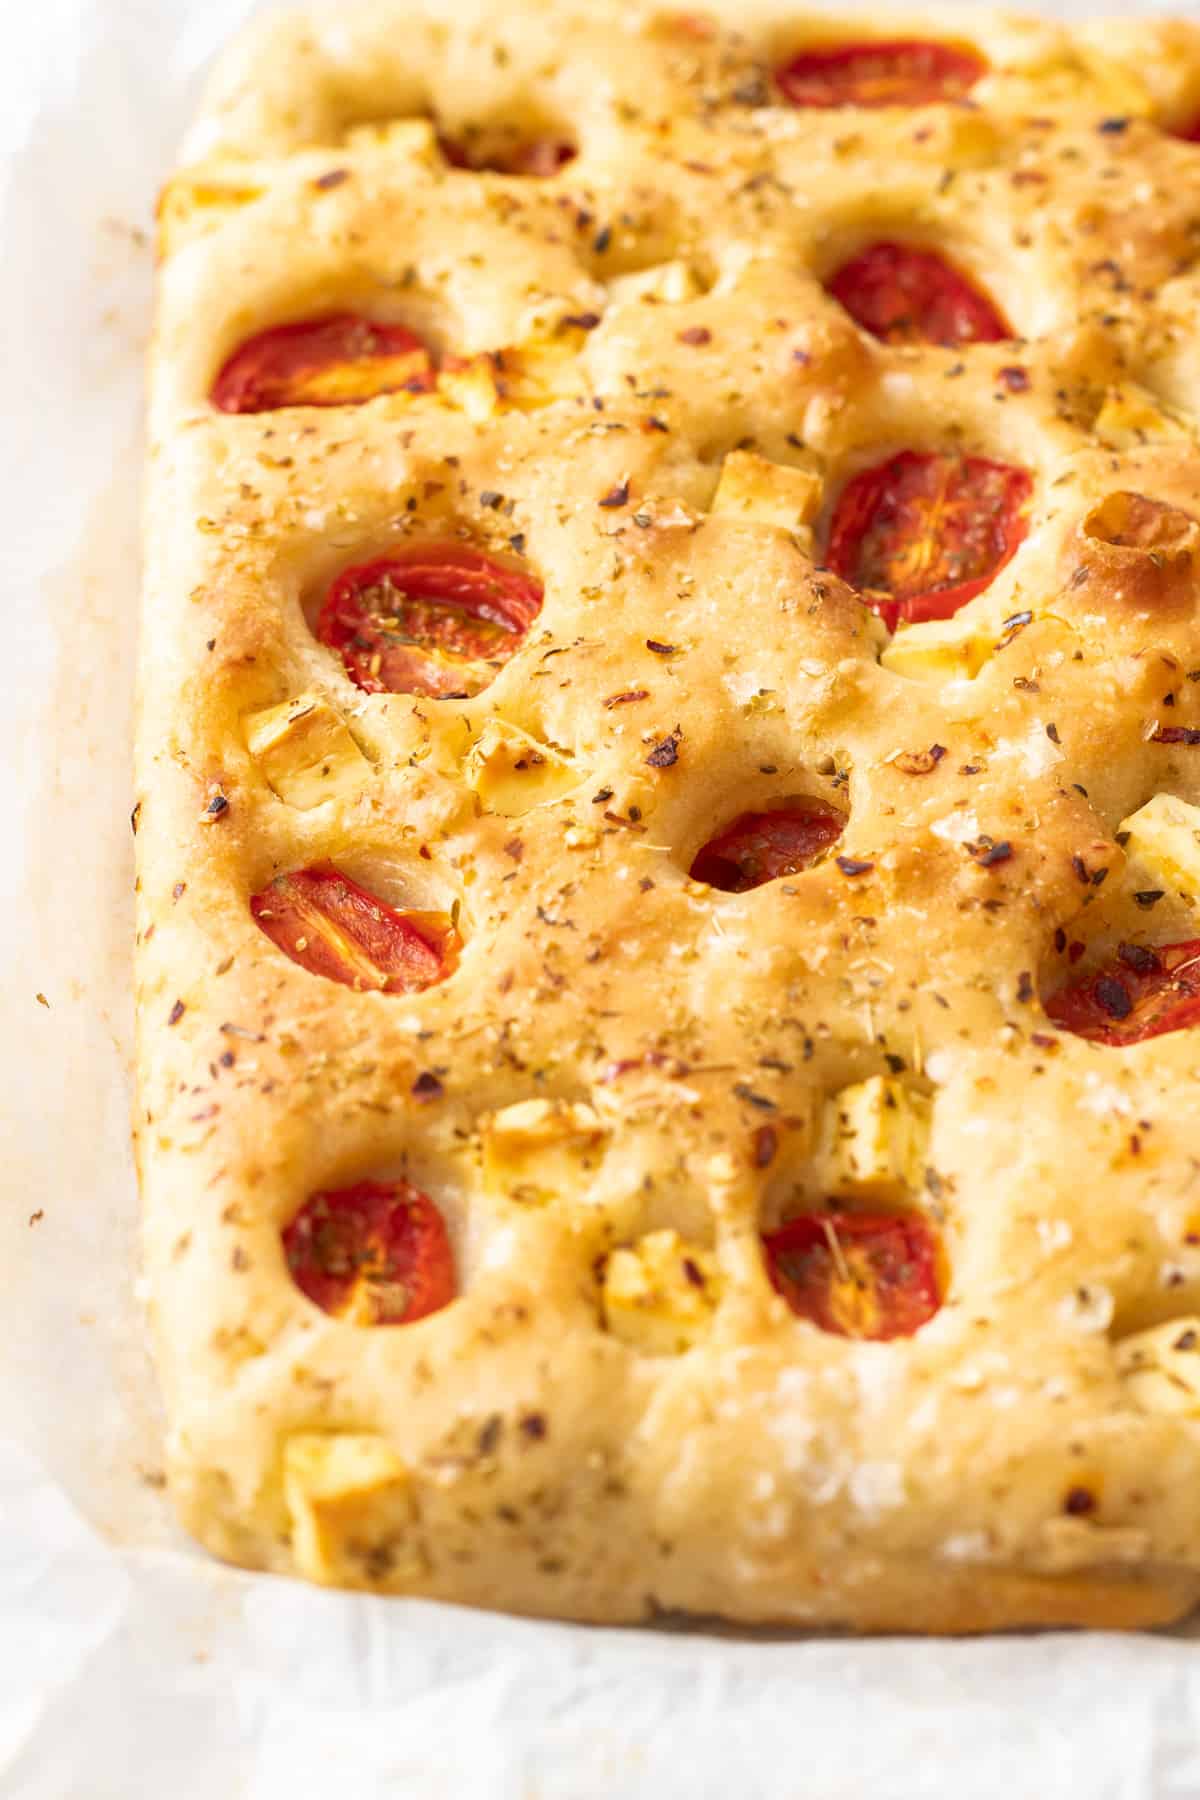 Up close shot of whole focaccia, studded with tomatoes and feta cheese.